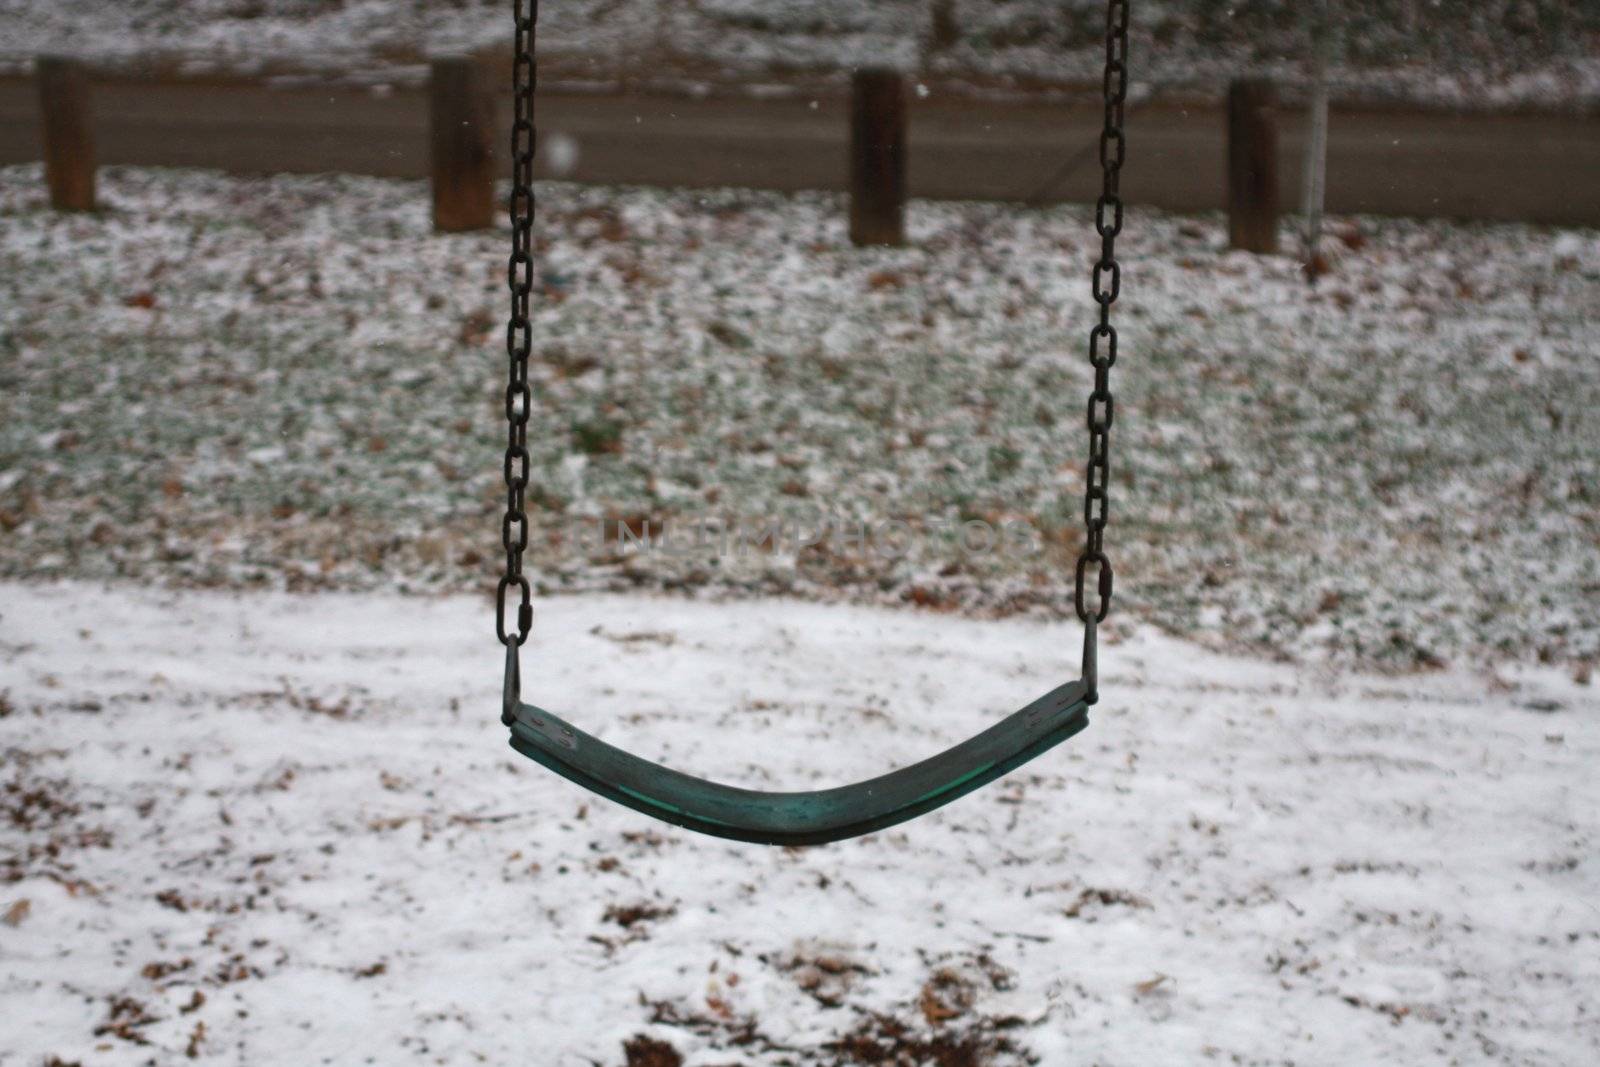 Outdoor Park Swing Isolated in the Snow by knktucker